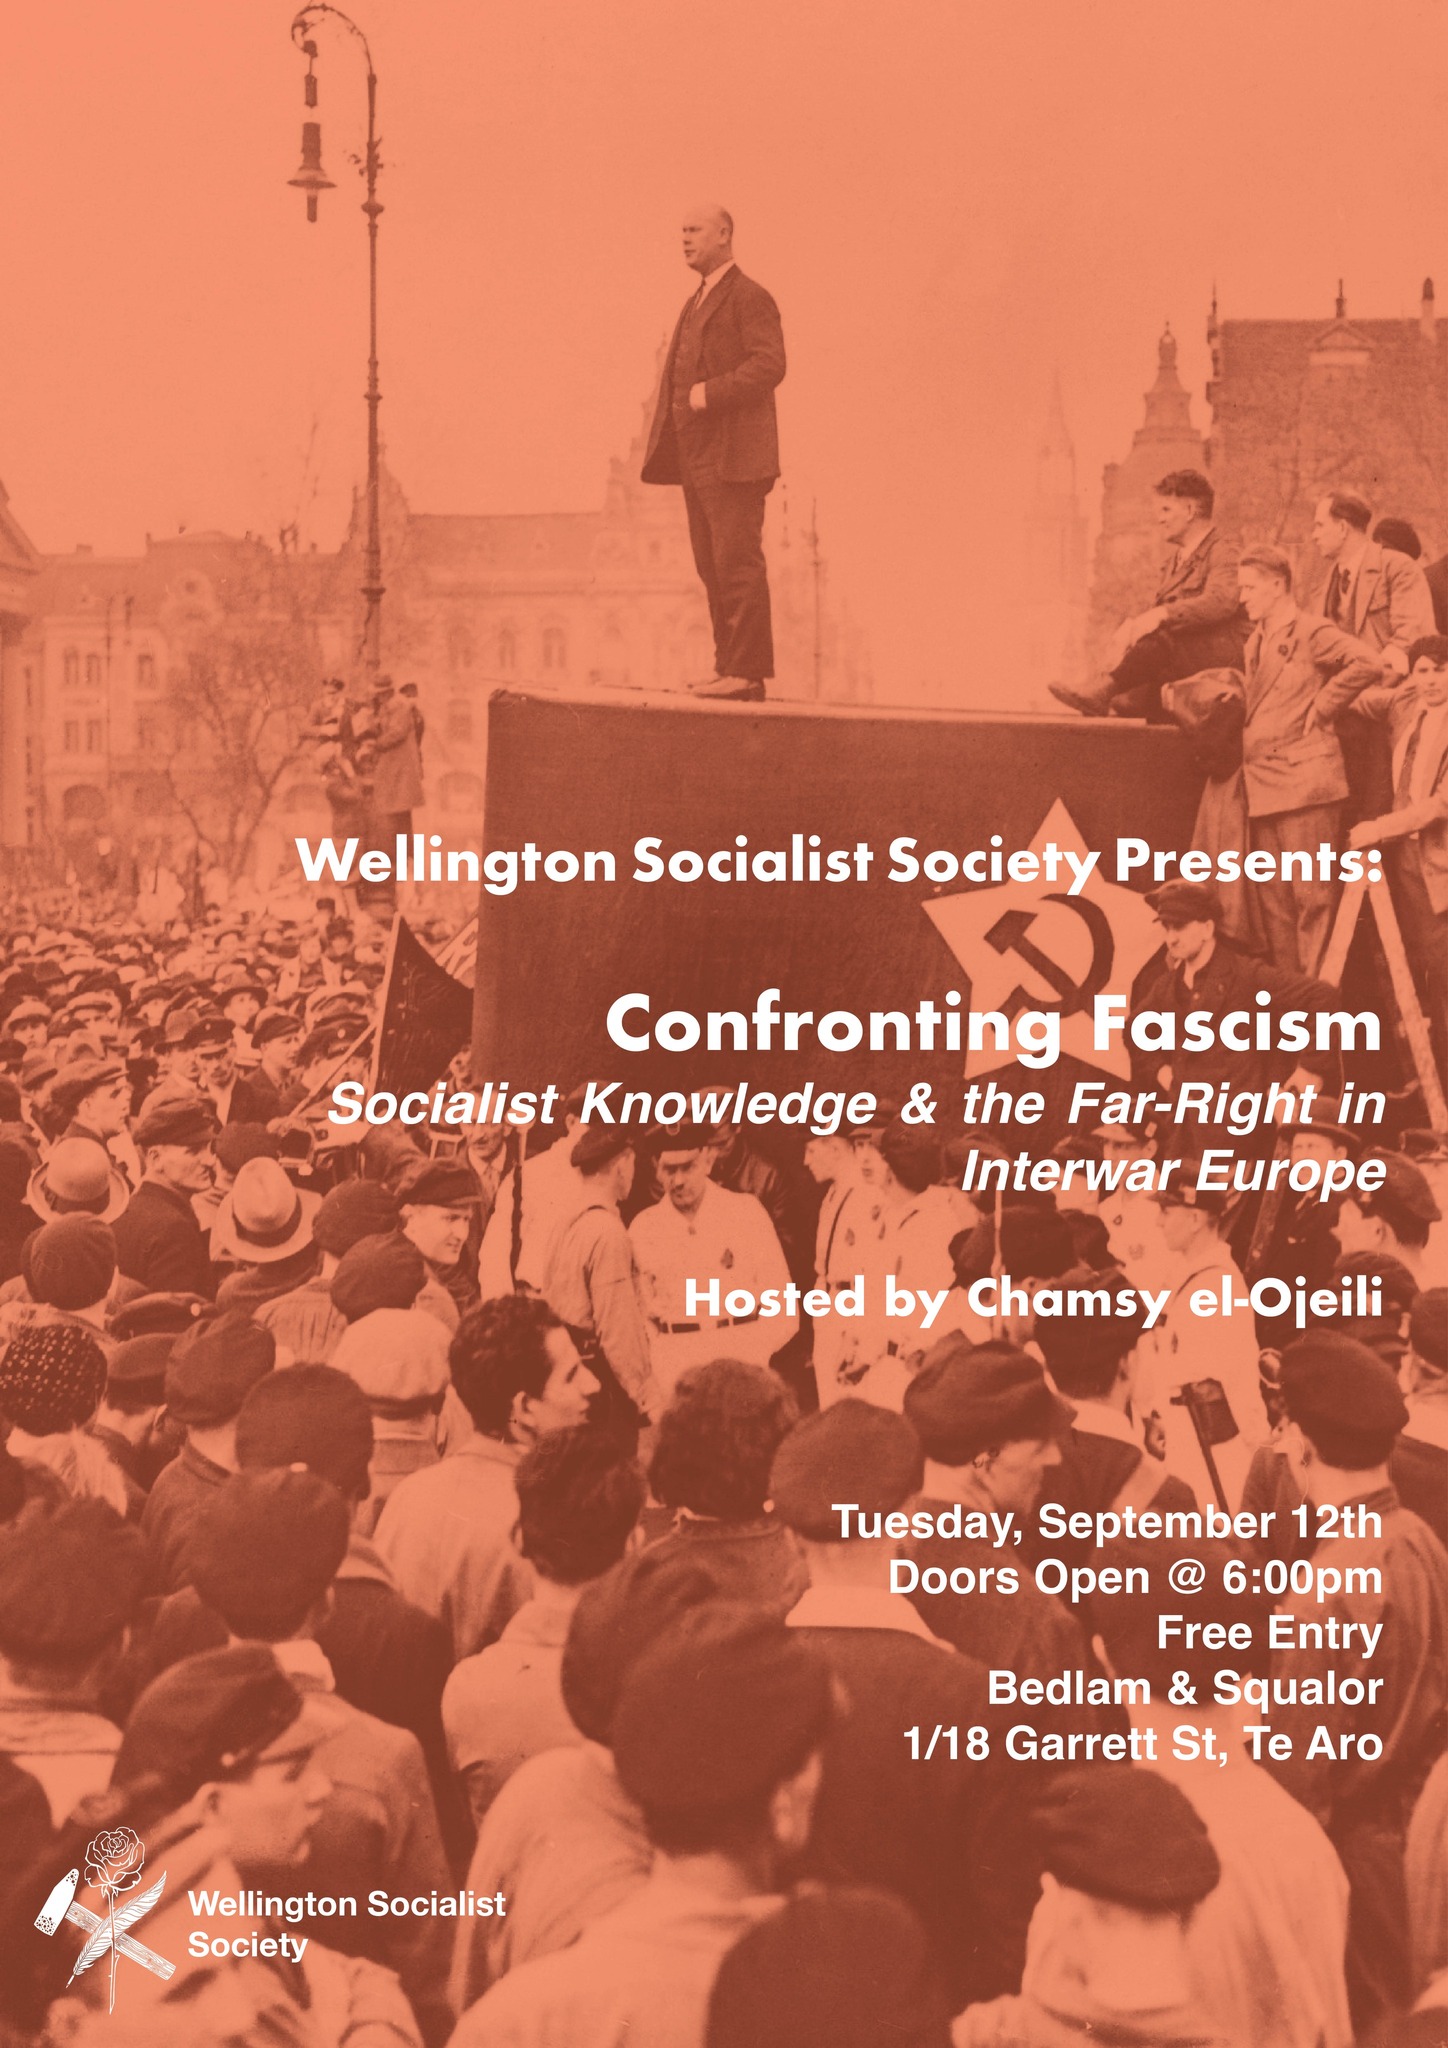 Confronting Fascism: Socialist Knowledge and the Far-Right in Interwar Europe